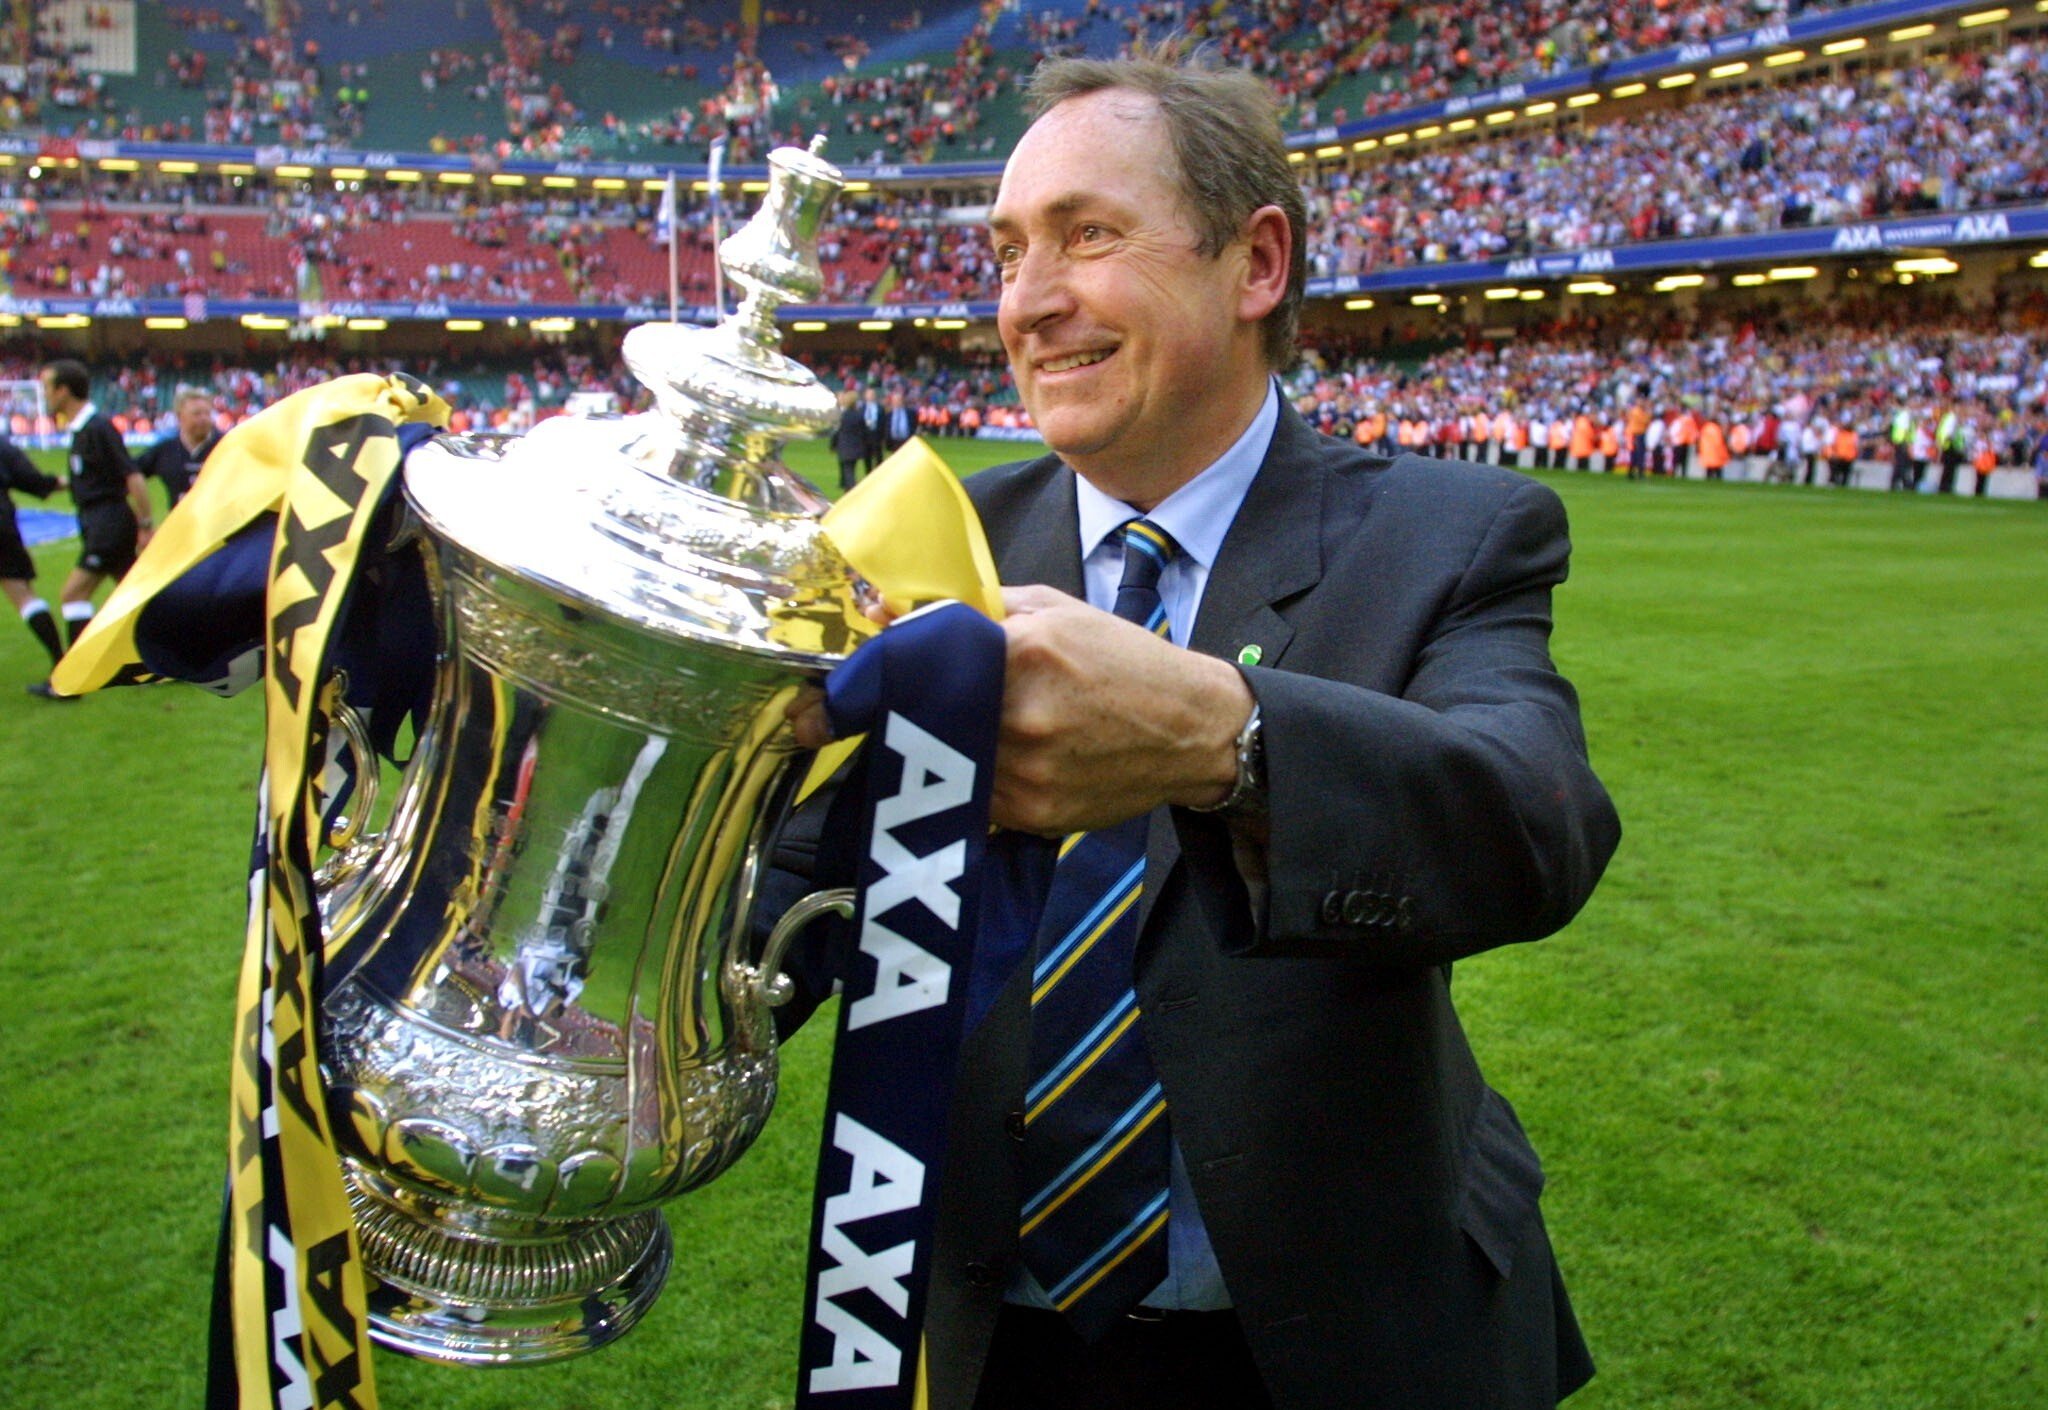 Gerard Houllier with the FA Cup trophy after Liverpool beat Arsenal at the Millennium Stadium in Cardiff in 2001. Photo: AFP